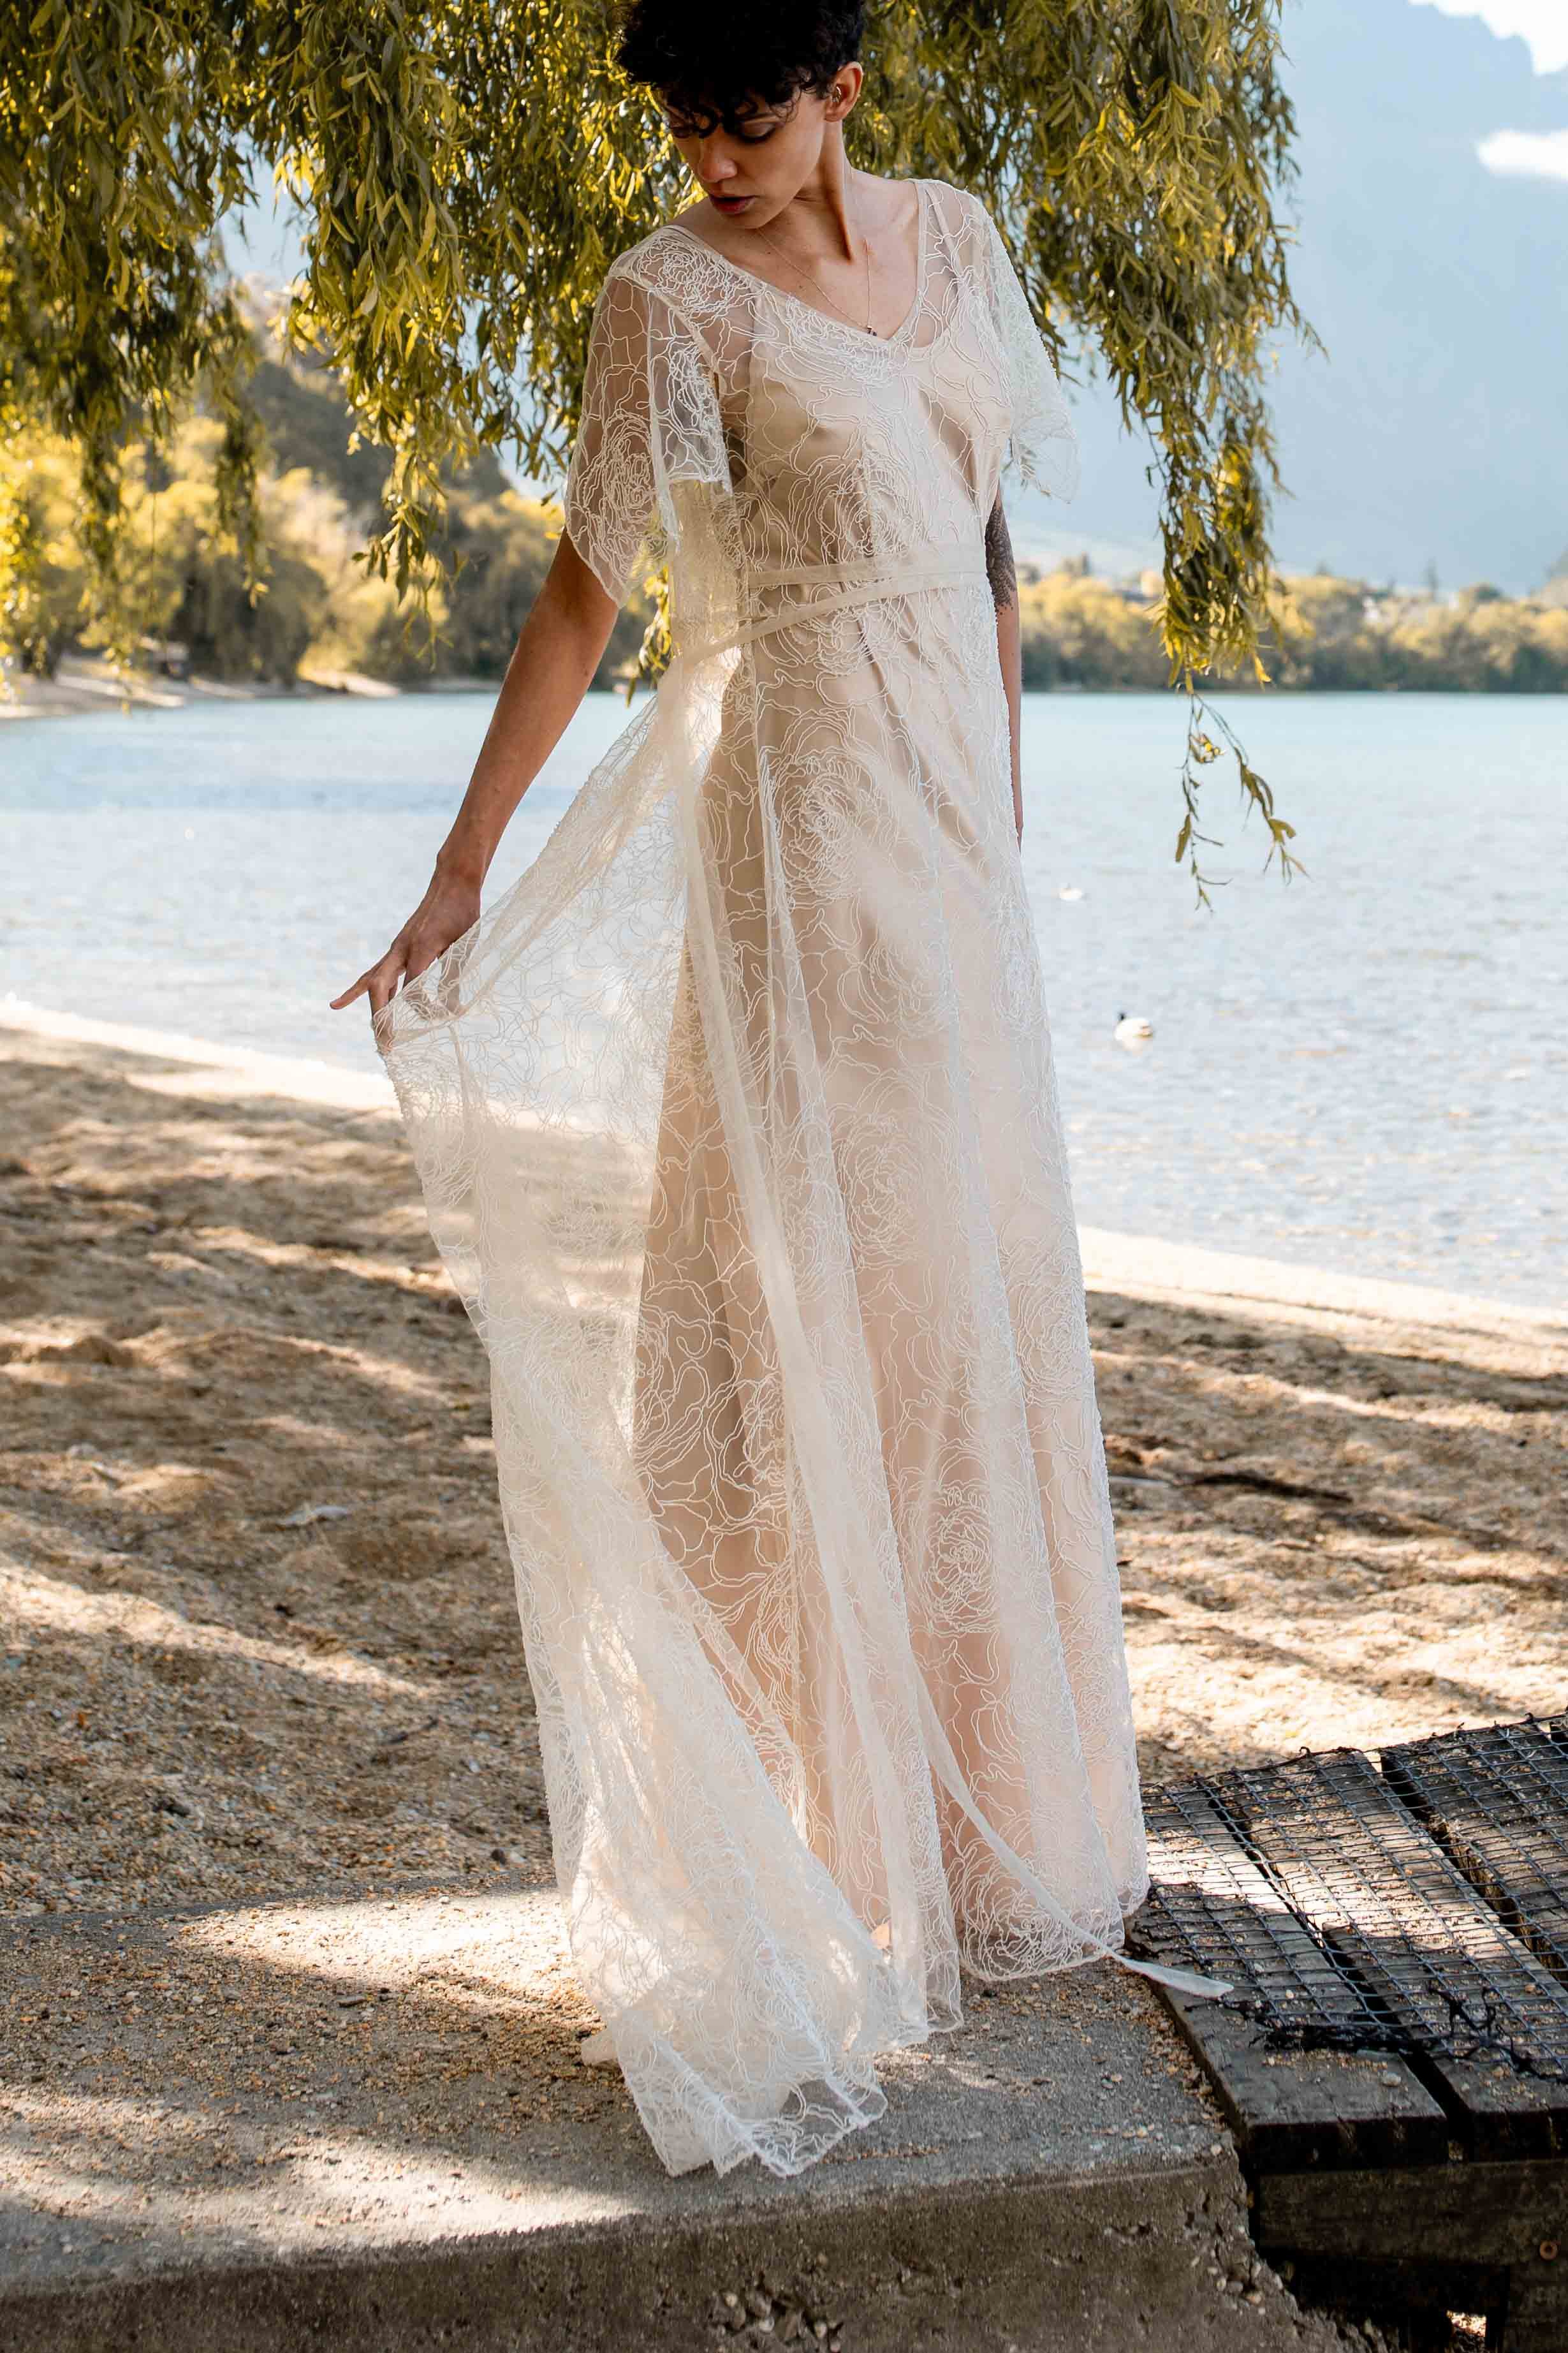 Peony Lace Wrap w Nude Slip - Nemo Bridal Couture Queenstown New Zealand 0V9A2221.jpg